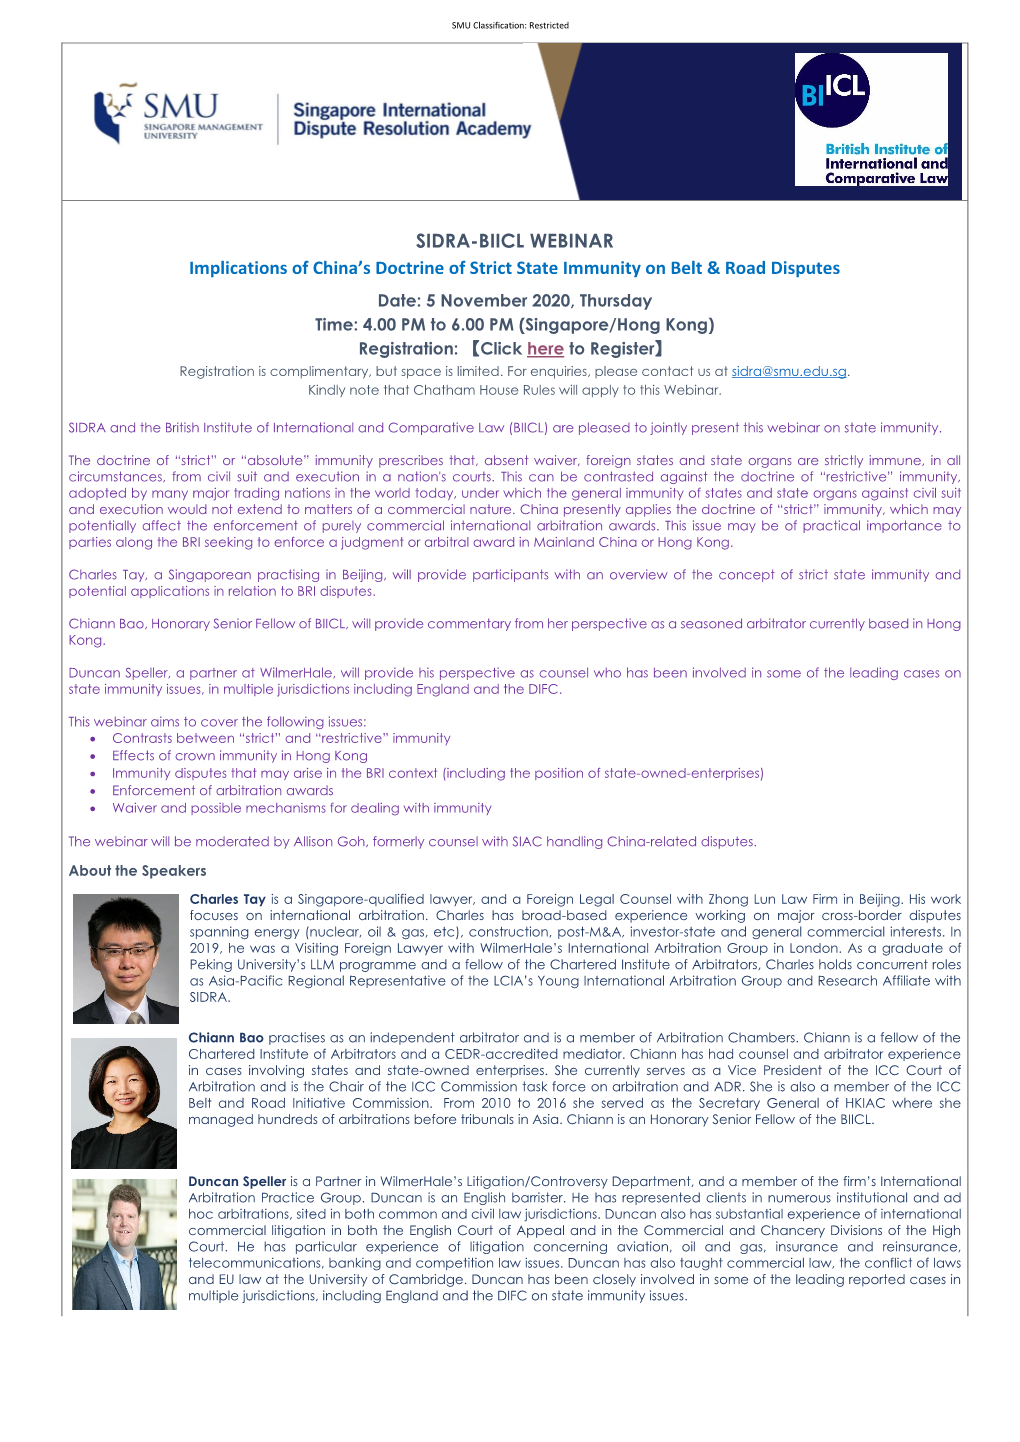 SIDRA-BIICL WEBINAR Implications of China's Doctrine of Strict State